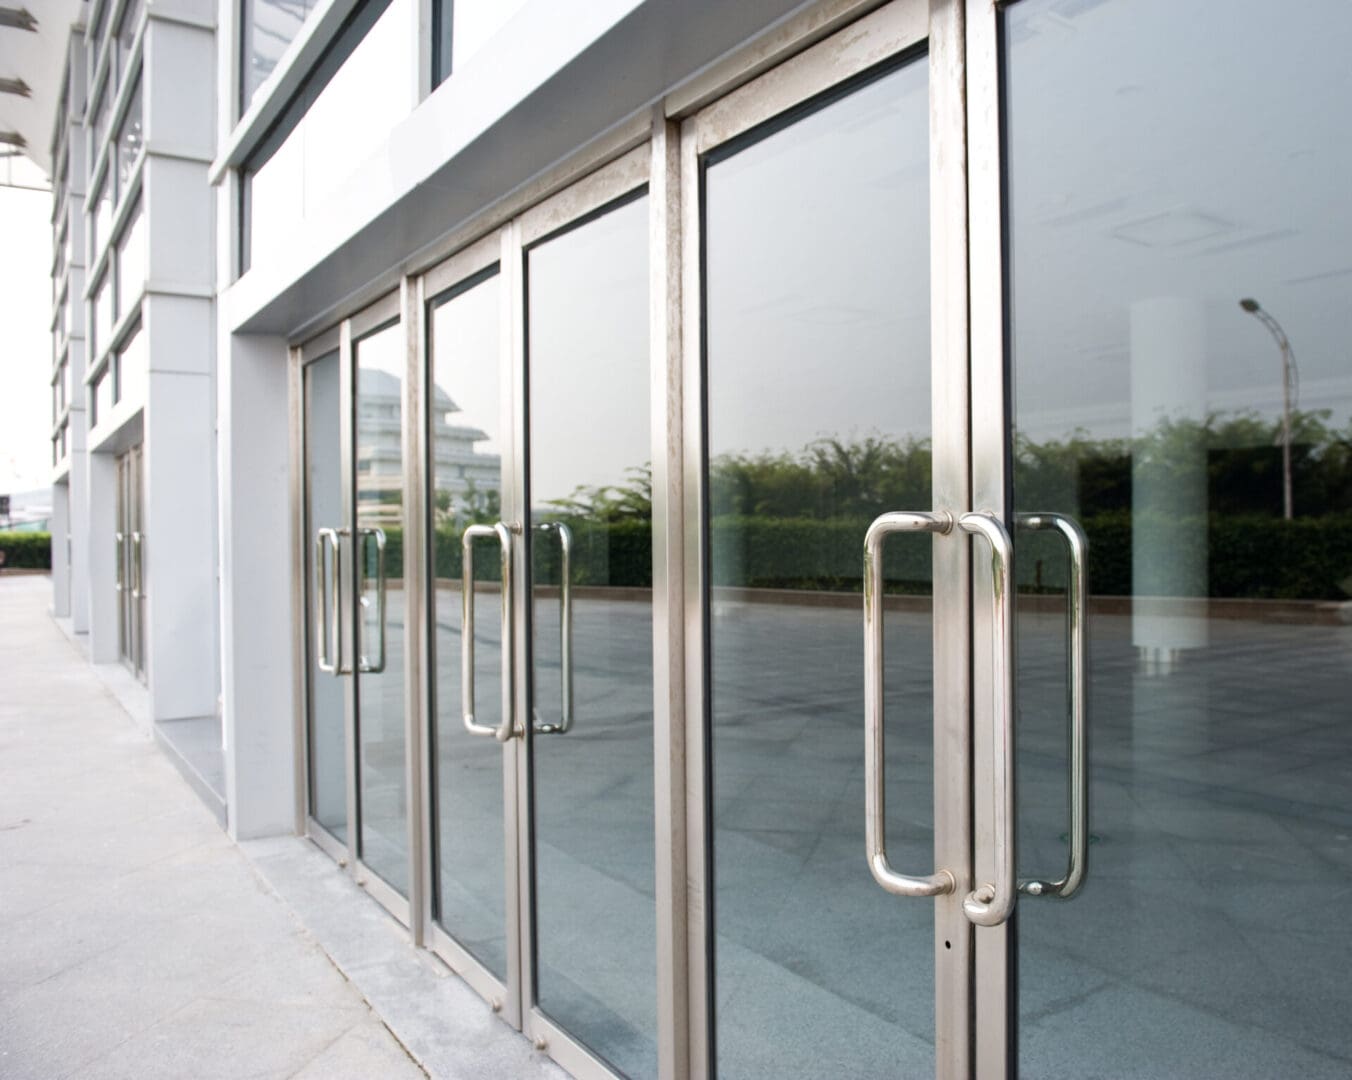 A glass door with some metal handles on it